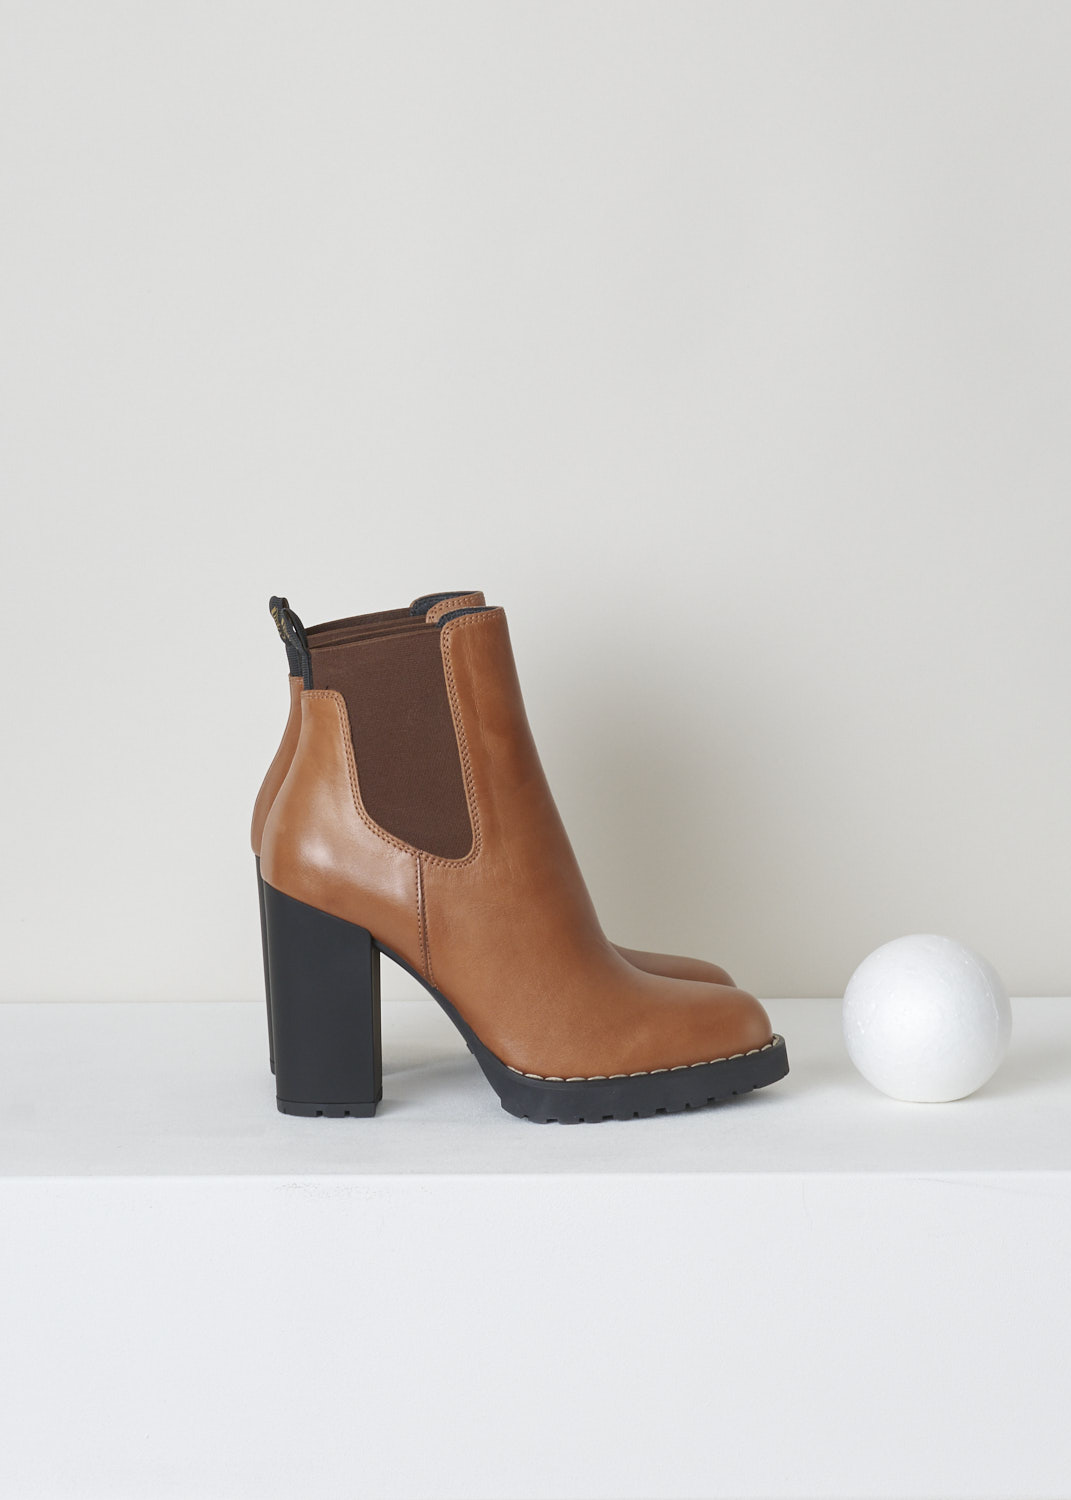 Hogan, Cognac colored Leather high heels chelsea boot, HXW5420DH00O6LS003_06l_cuoio_sc, brown, side, Cognac colored boots made from leather, featuring brown gusseted sides and a logo branded grosgrain pull-tab for easy entry. Lovely feature about this boot is the contrasting beige stitching on top of the sole, just adds some extra excitement and combination possibilities. Furthermore this model comes with a full rubber sole.

Heel height: 10 cm / 3.9 inch. 